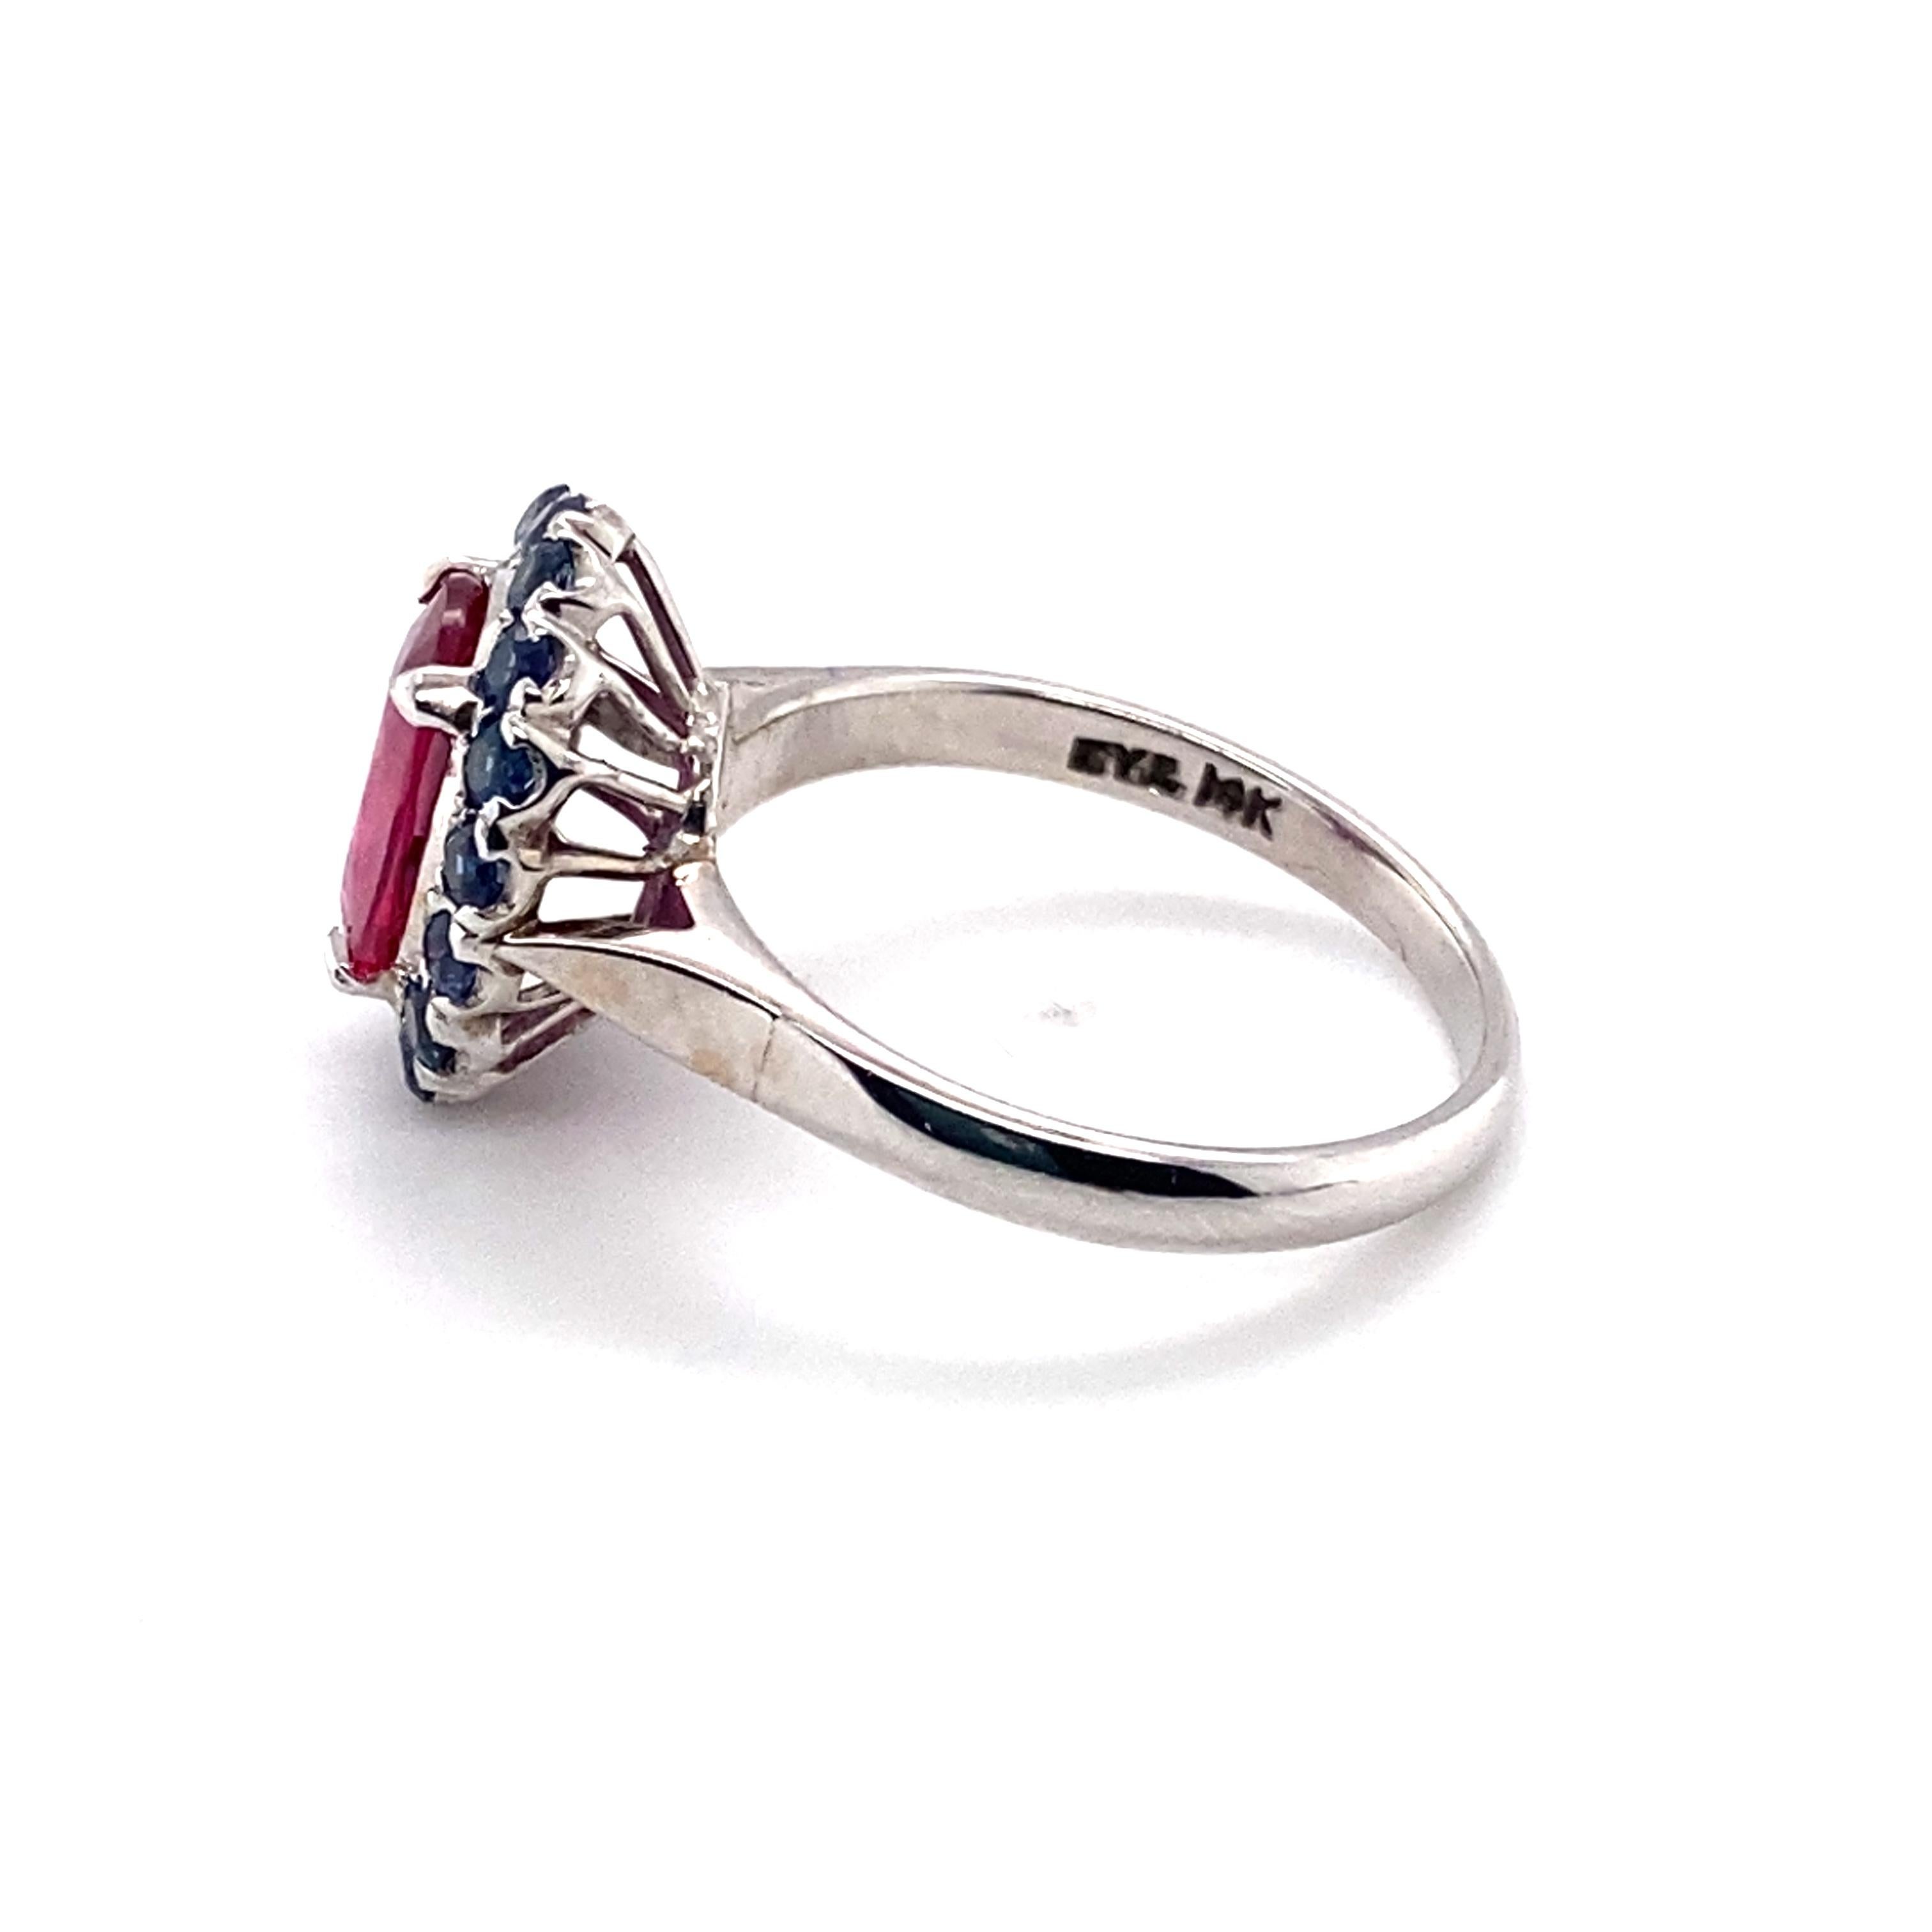 1.56 Carat Total Ruby and 1.14 Carat Total Sapphire Ring in 14 Karat White Gold In Excellent Condition For Sale In Atlanta, GA